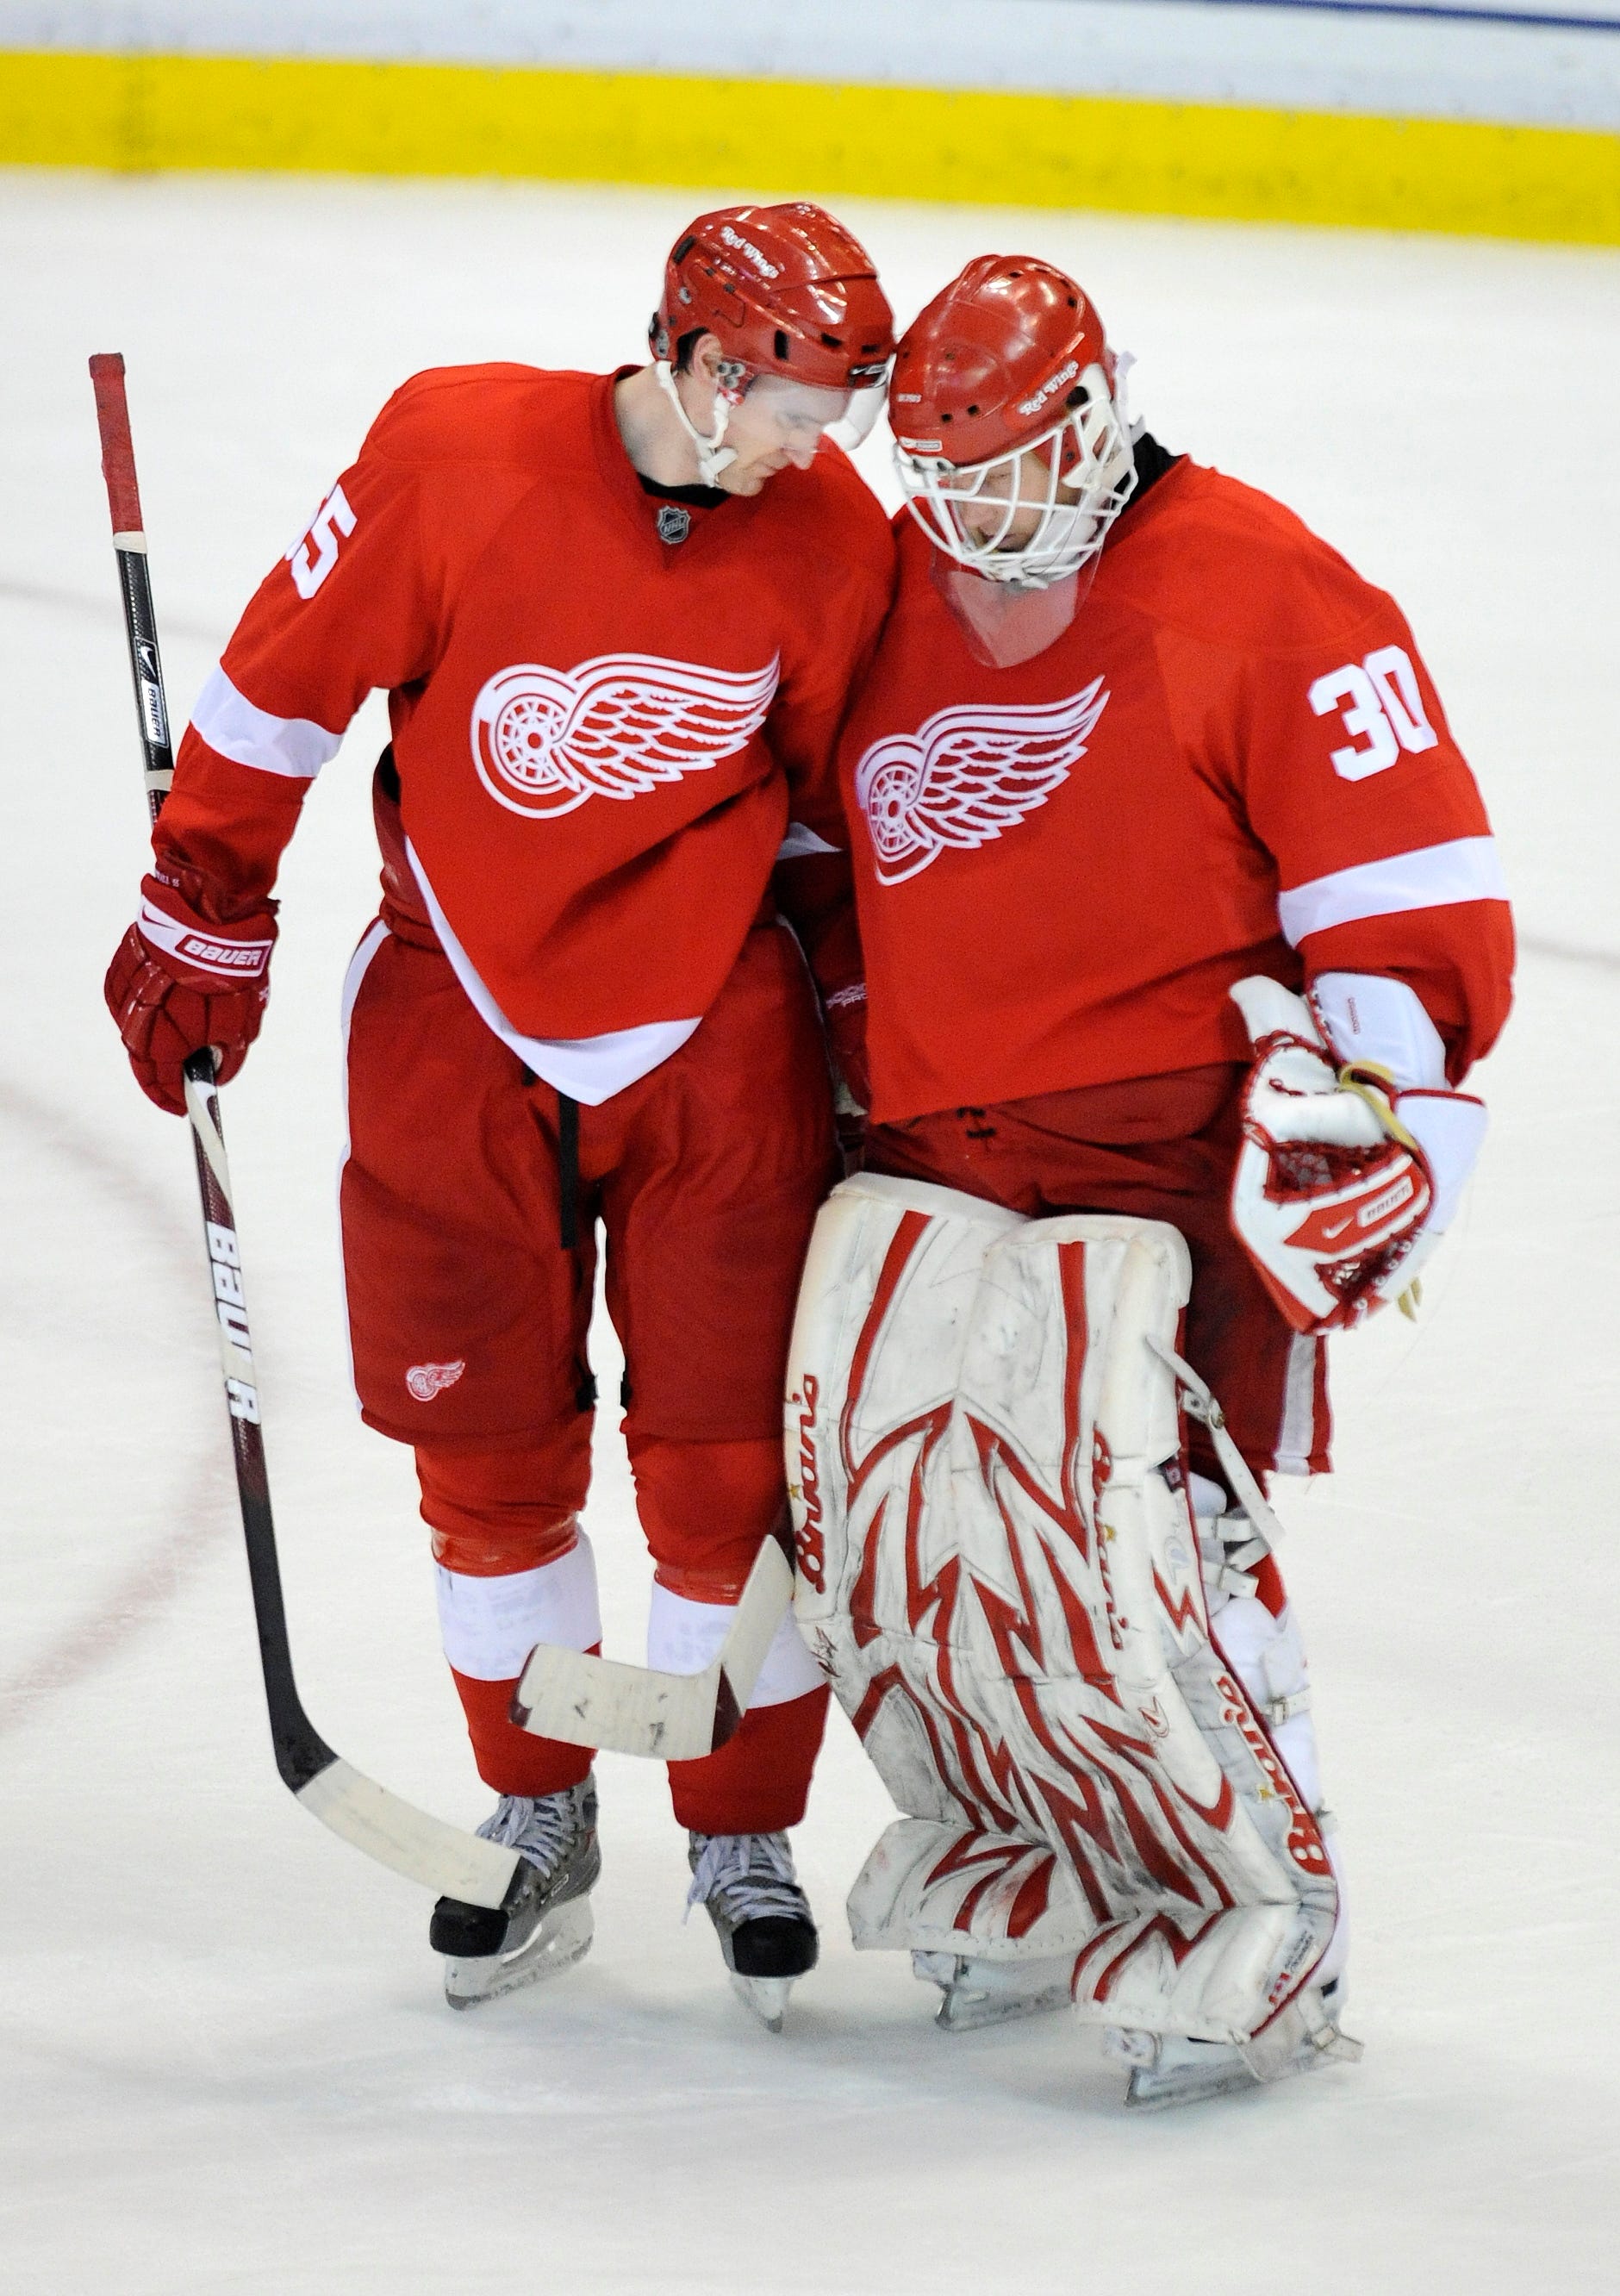 Detroit Red Wings defenseman Niklas Kronwall congratulates goalie Chris Osgood after a 4-1 victory over the Columbus Blue Jackets in Game 1 of the Eastern Conference quarterfinals at Joe Louis Arena on April 16, 2009.